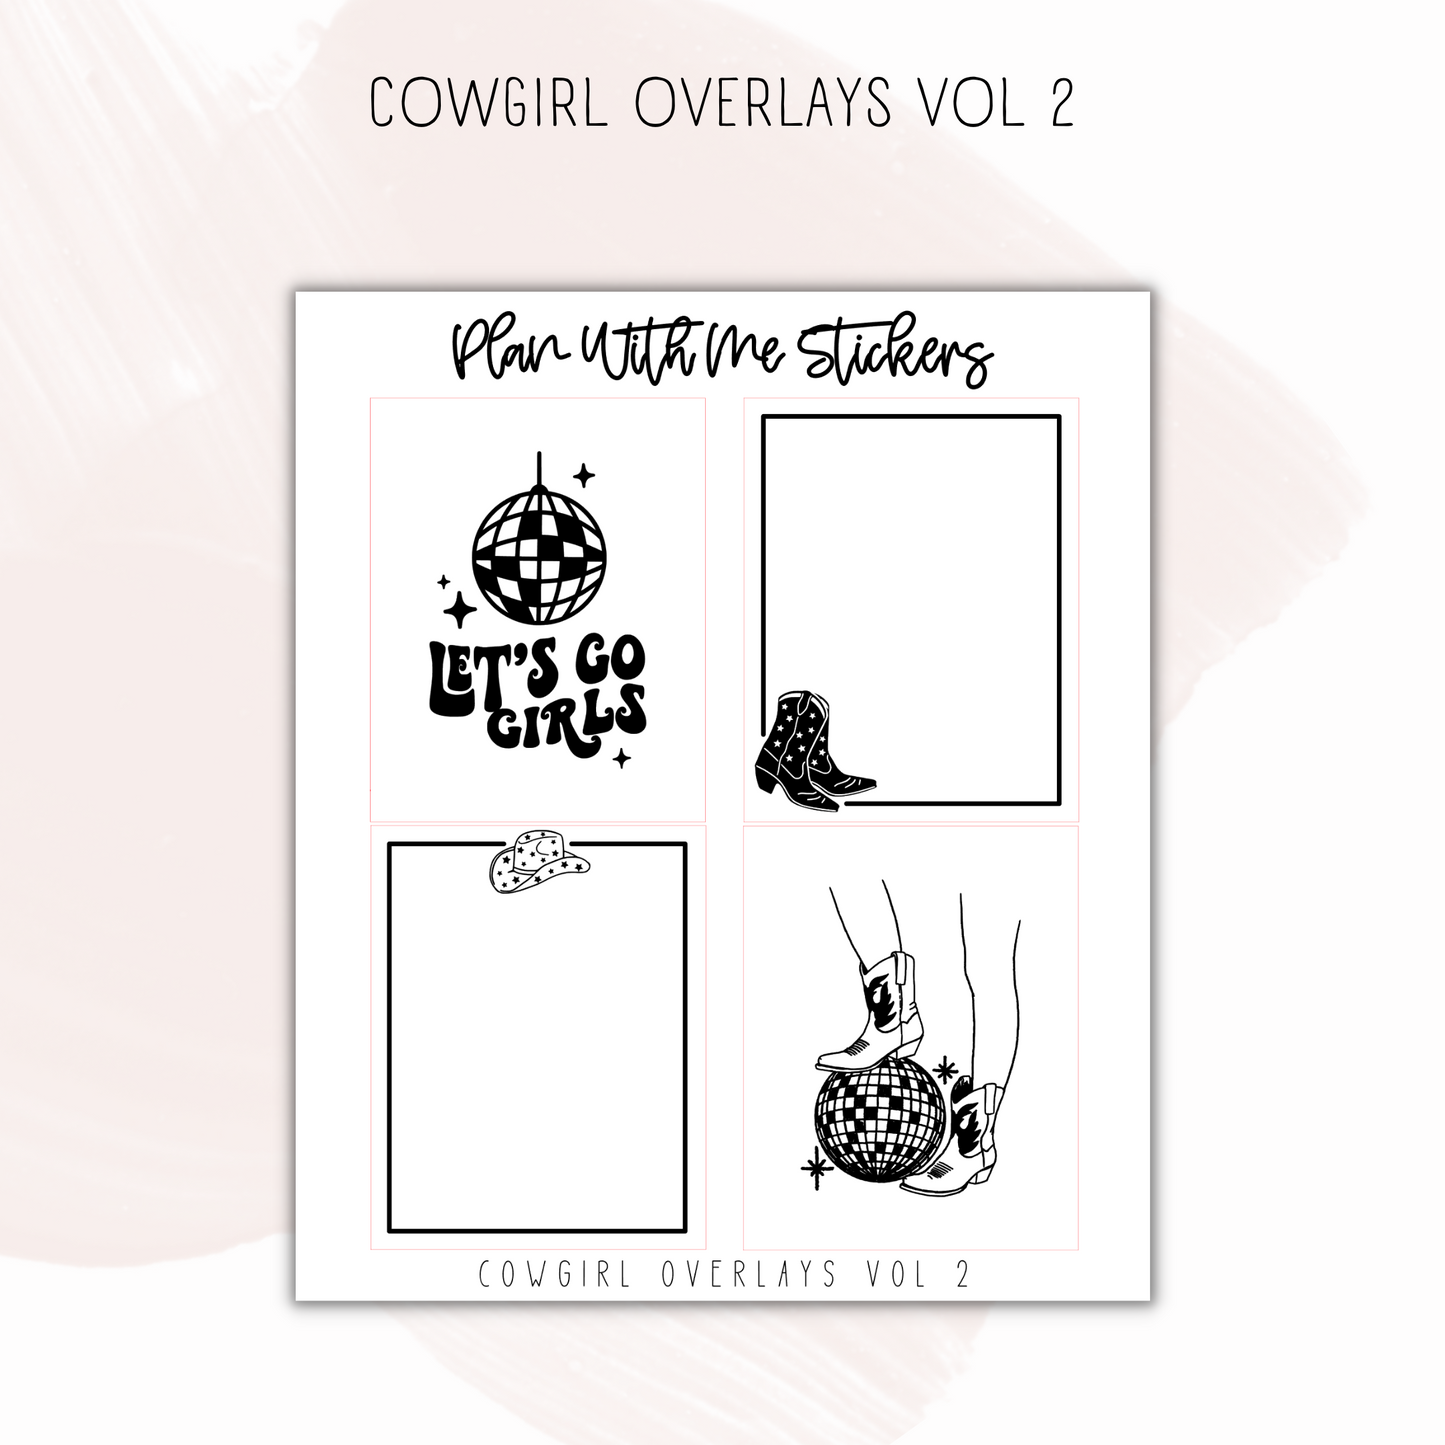 Cowgirl Overlays Vol 2